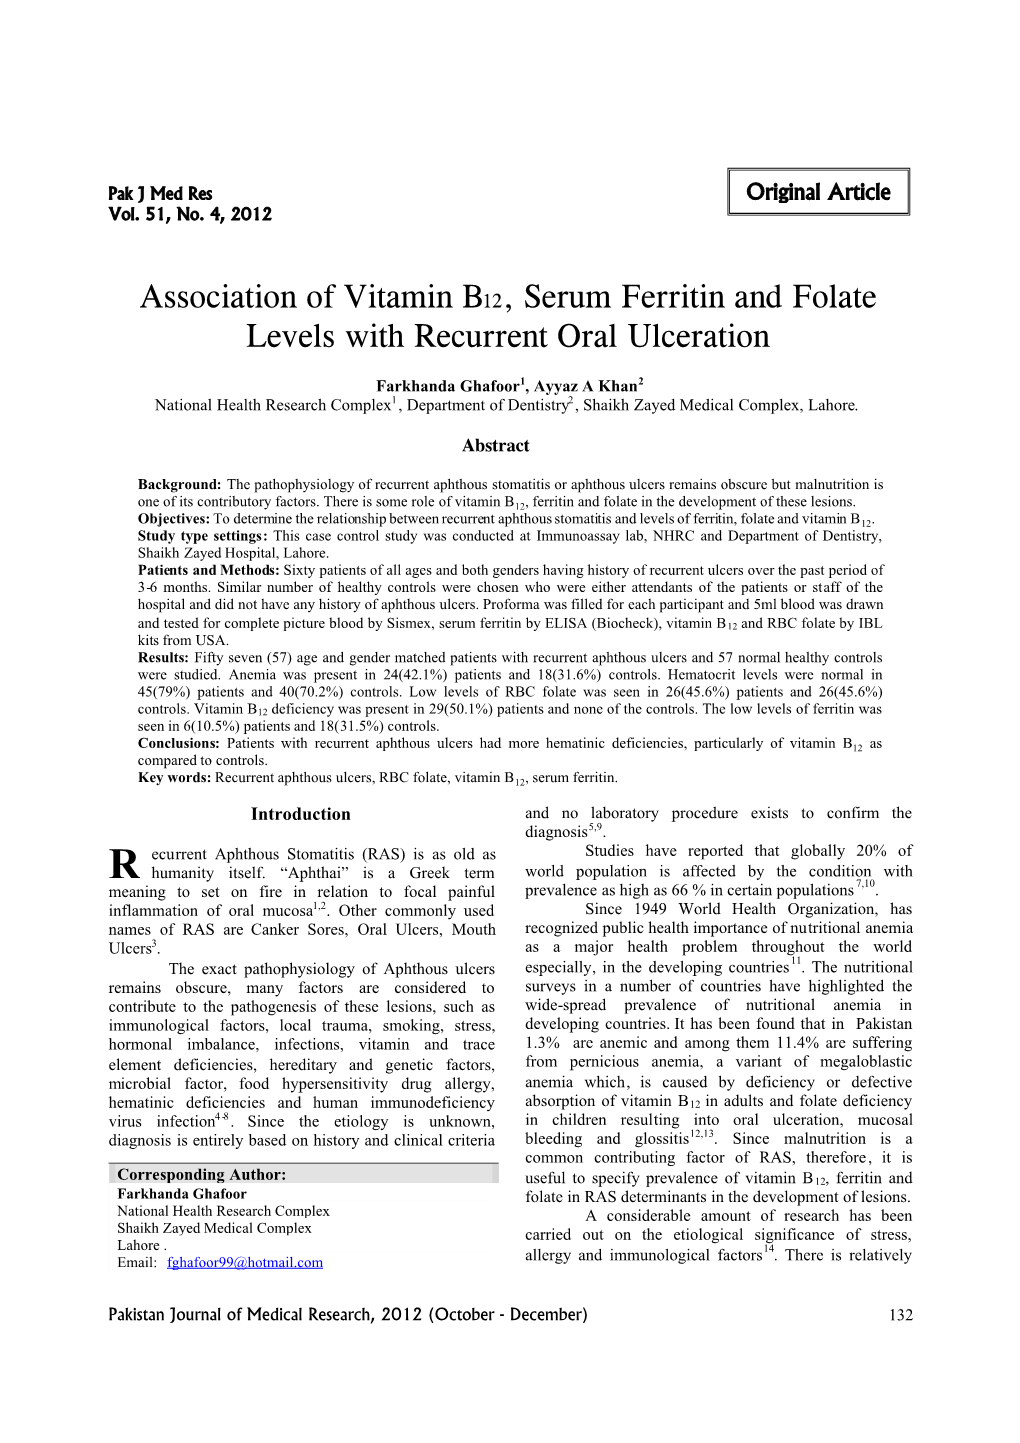 Association of Vitamin B12, Serum Ferritin and Folate Levels with Recurrent Oral Ulceration